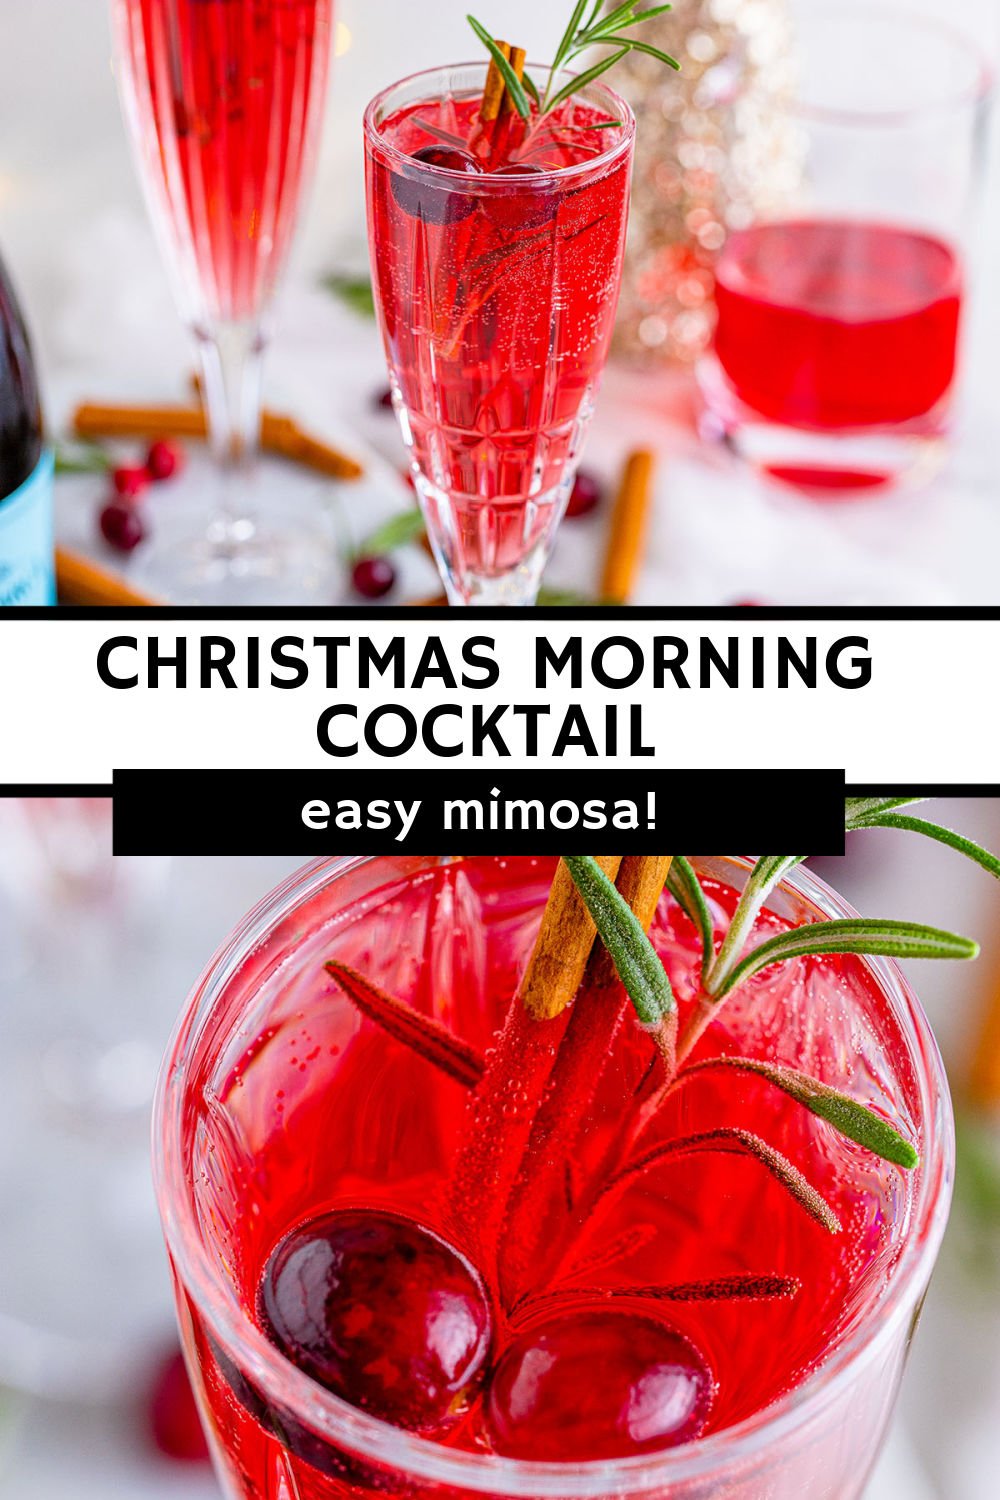 Make your morning merry and bright with a Christmas Morning Cocktail! This easy Christmas mimosa is perfect for breakfast, brunch, or at a party. You'll want to make this cheery cocktail all year long. | www.persnicketyplates.com